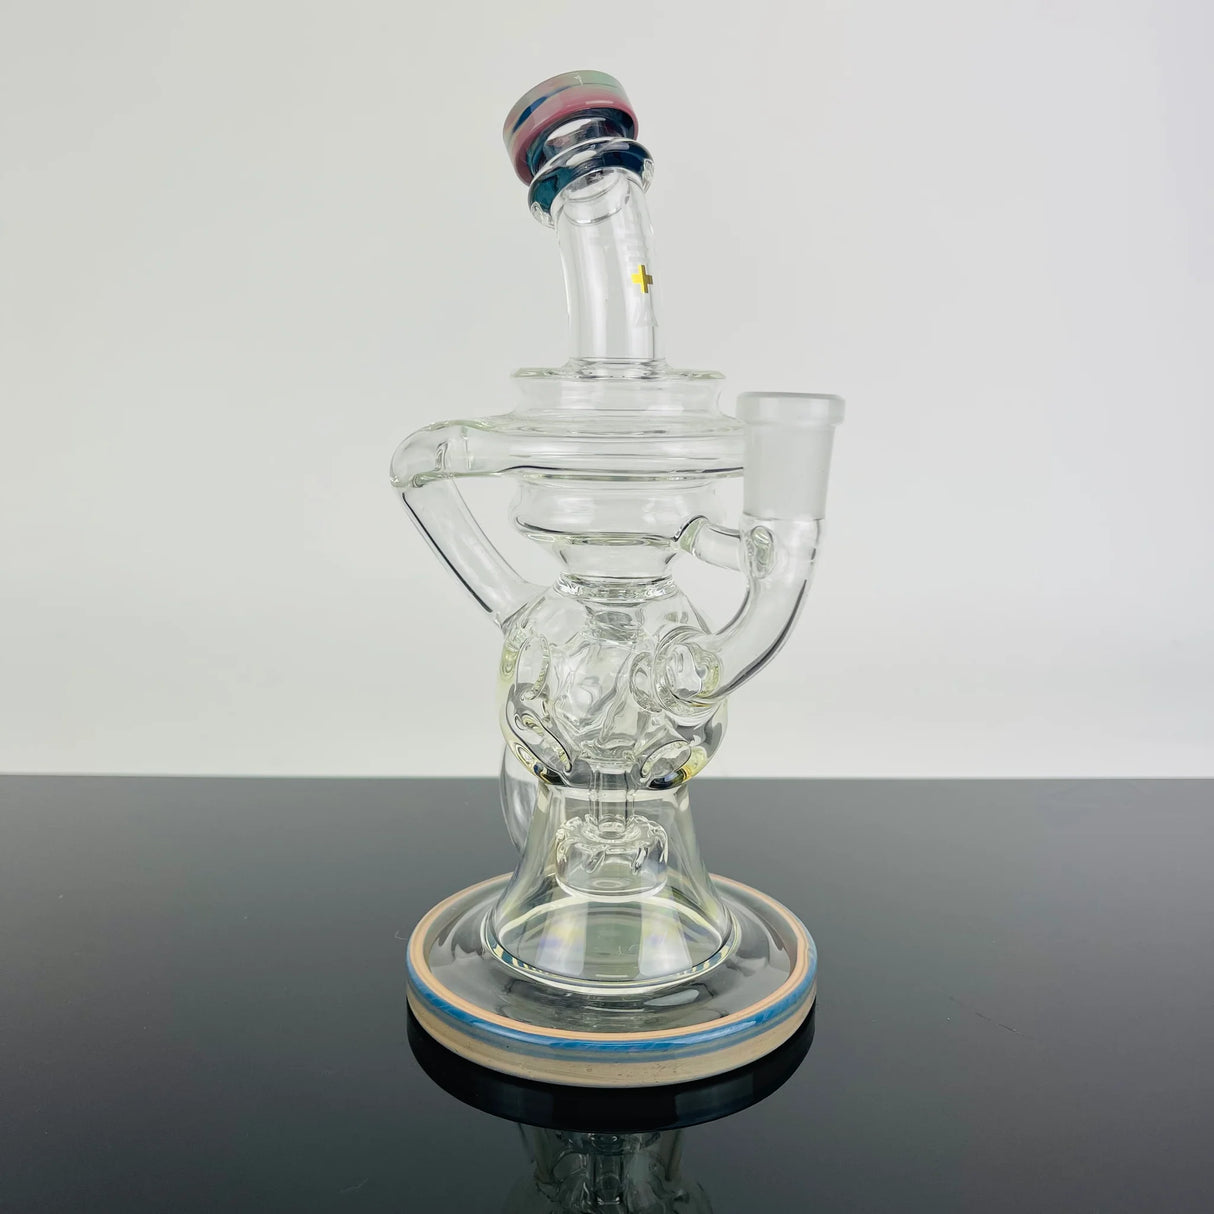 Beta Glass Labs Omega 2.0 clear dab rig with slyme accents, 90-degree banger hanger design